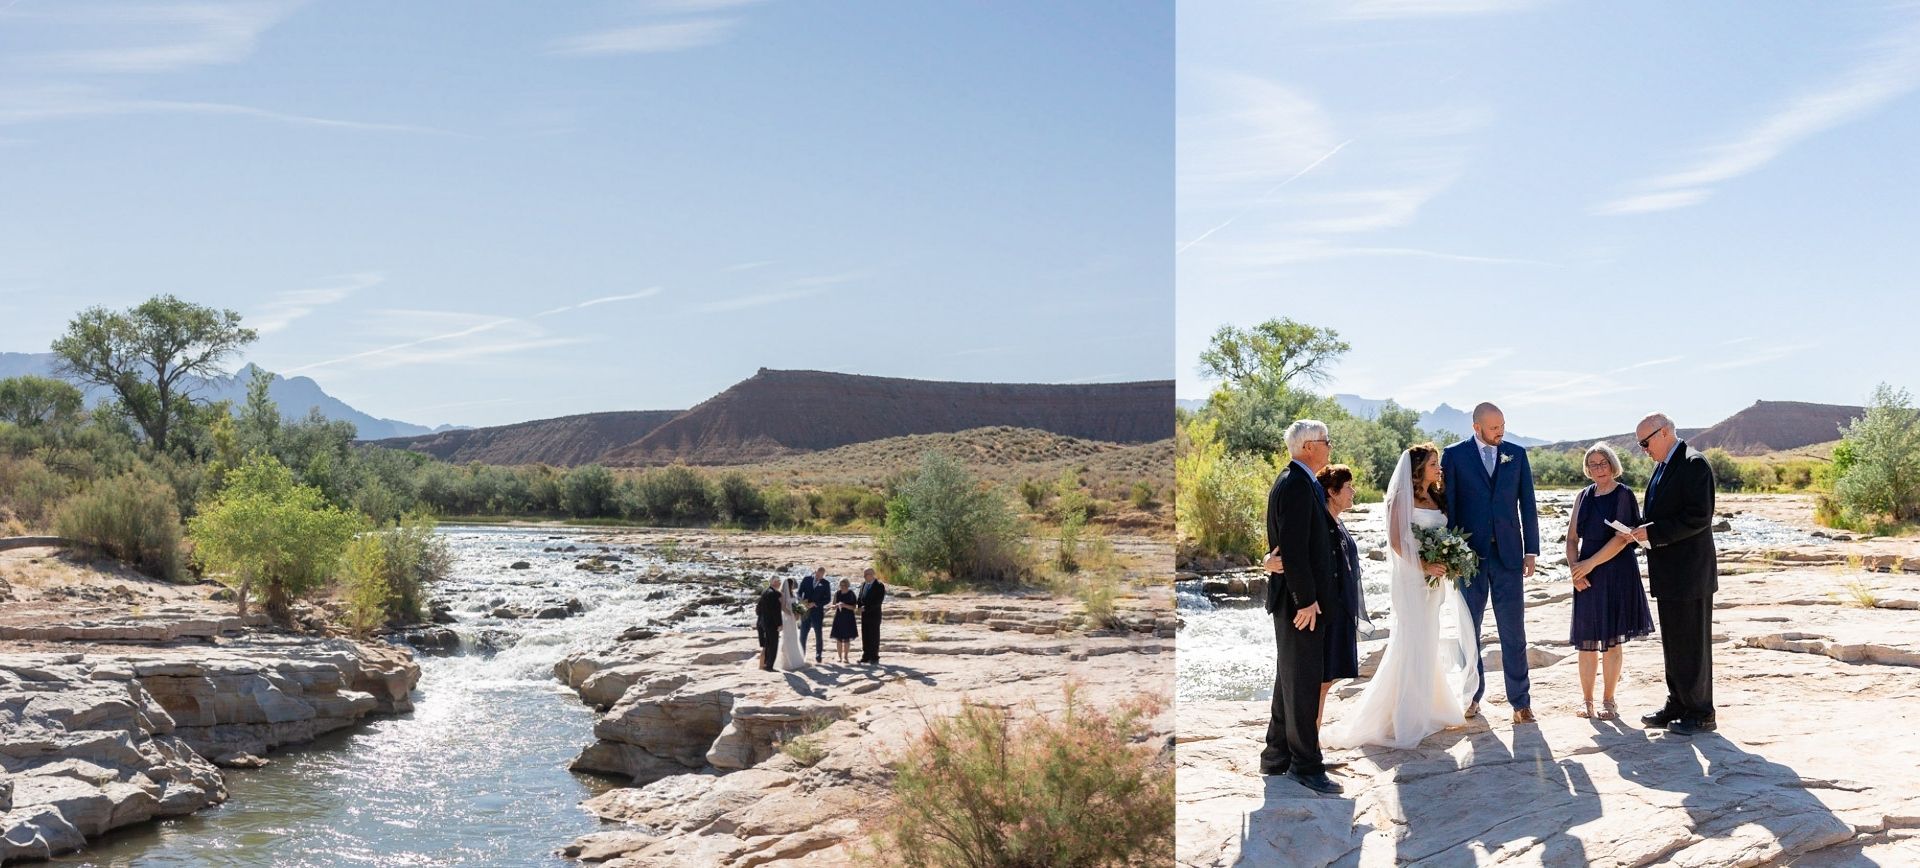 zion national park wedding in utah - bride & groom during elopement ceremony - full day package